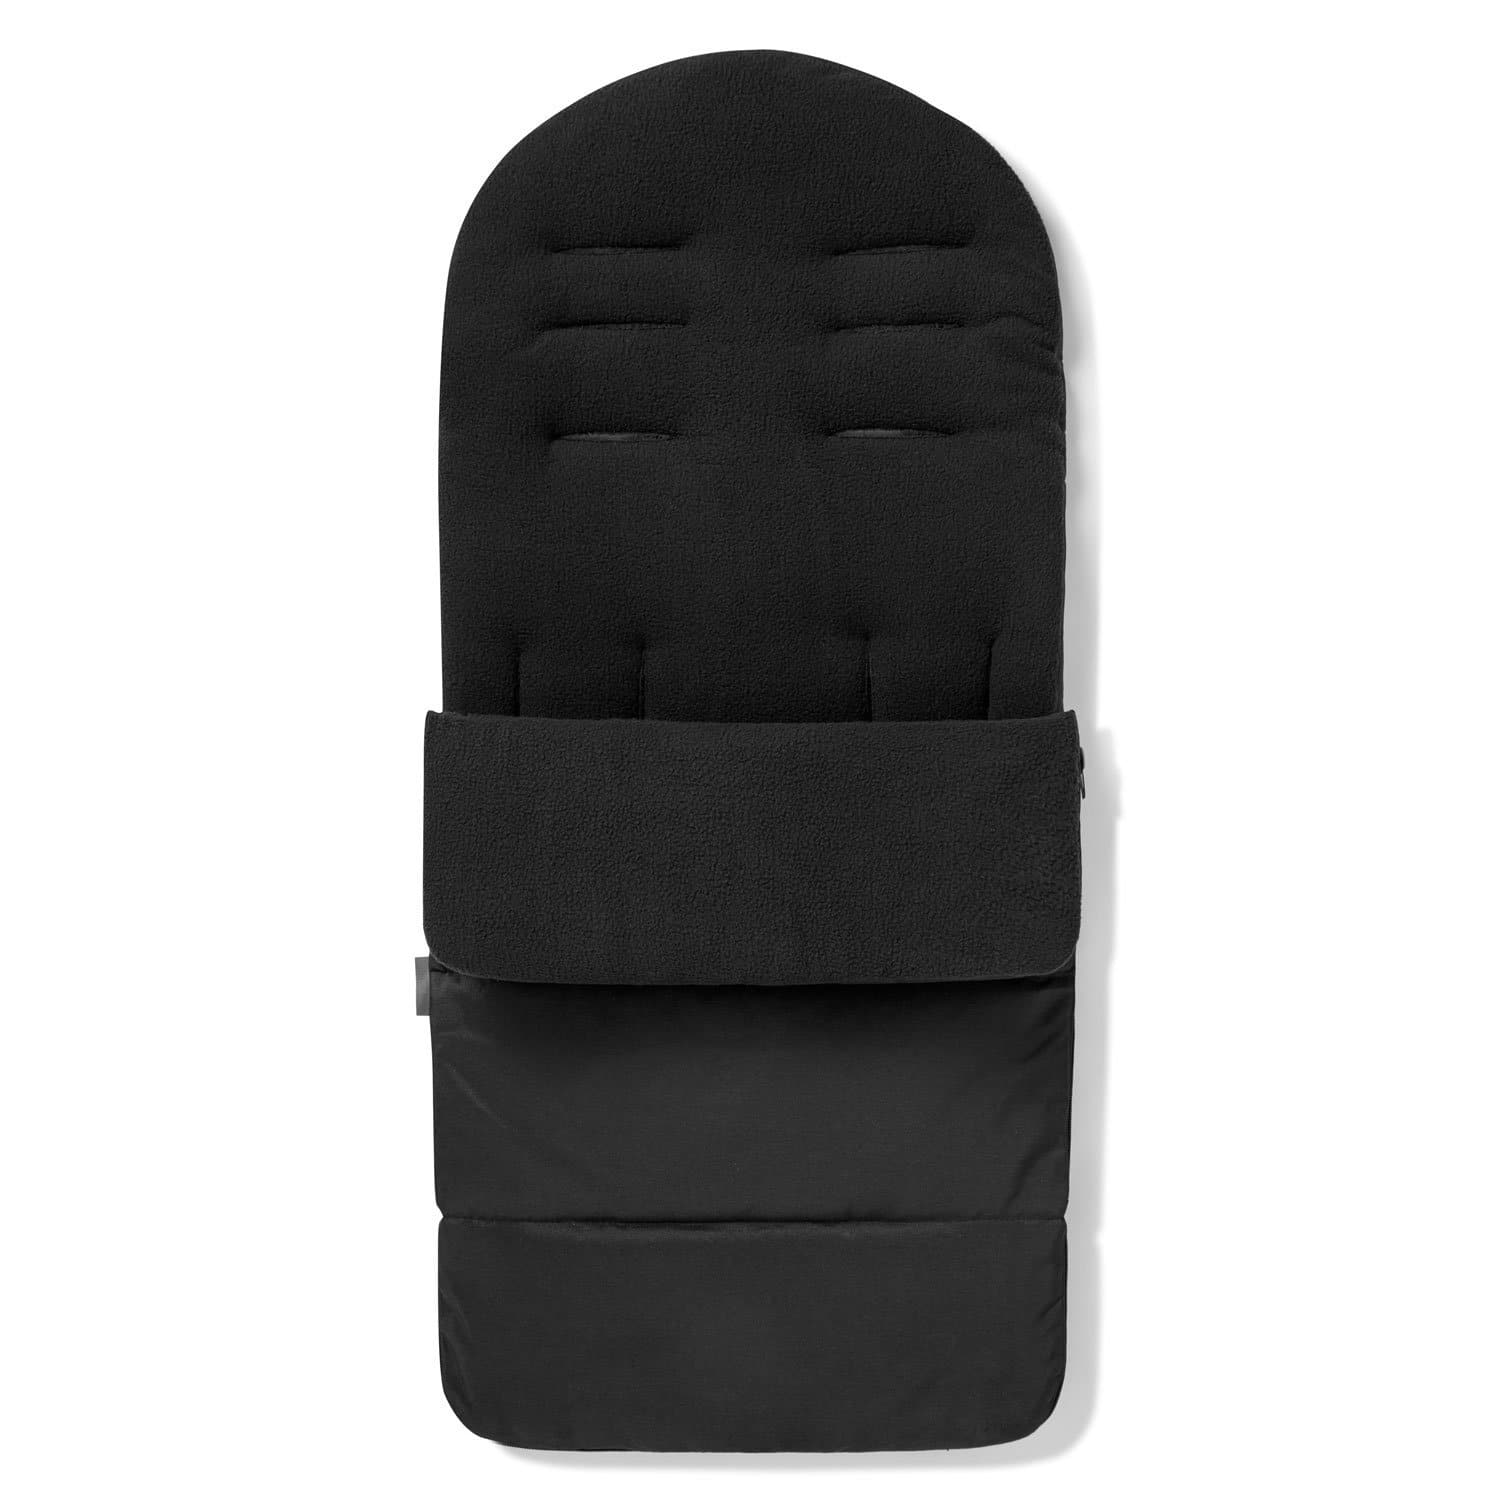 Premium Footmuff / Cosy Toes Compatible with Valco - Black Jack / Fits All Models | For Your Little One